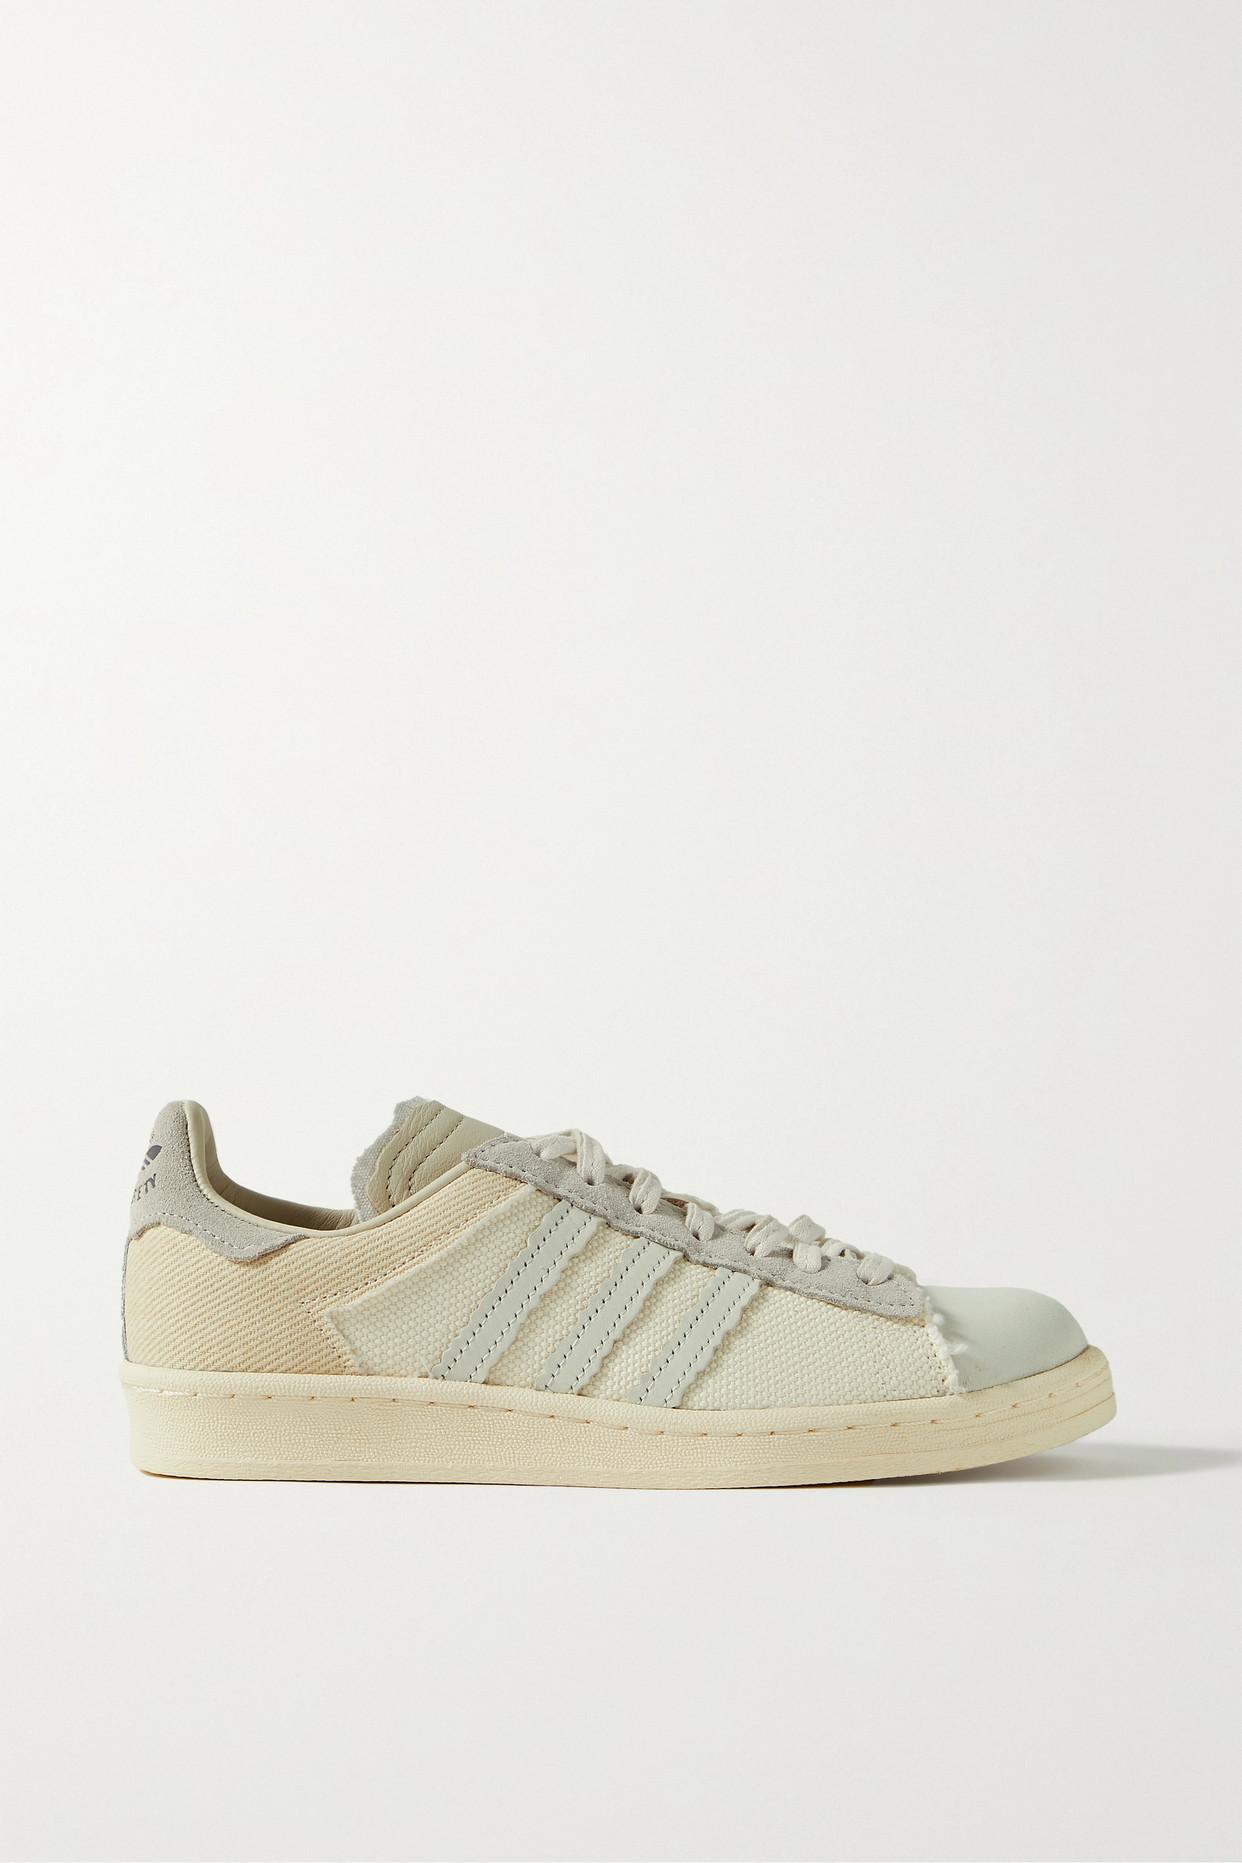 adidas Originals + Highsnobiety High Art Twill, Nubuck And Suede-trimmed  Canvas Sneakers in White | Lyst